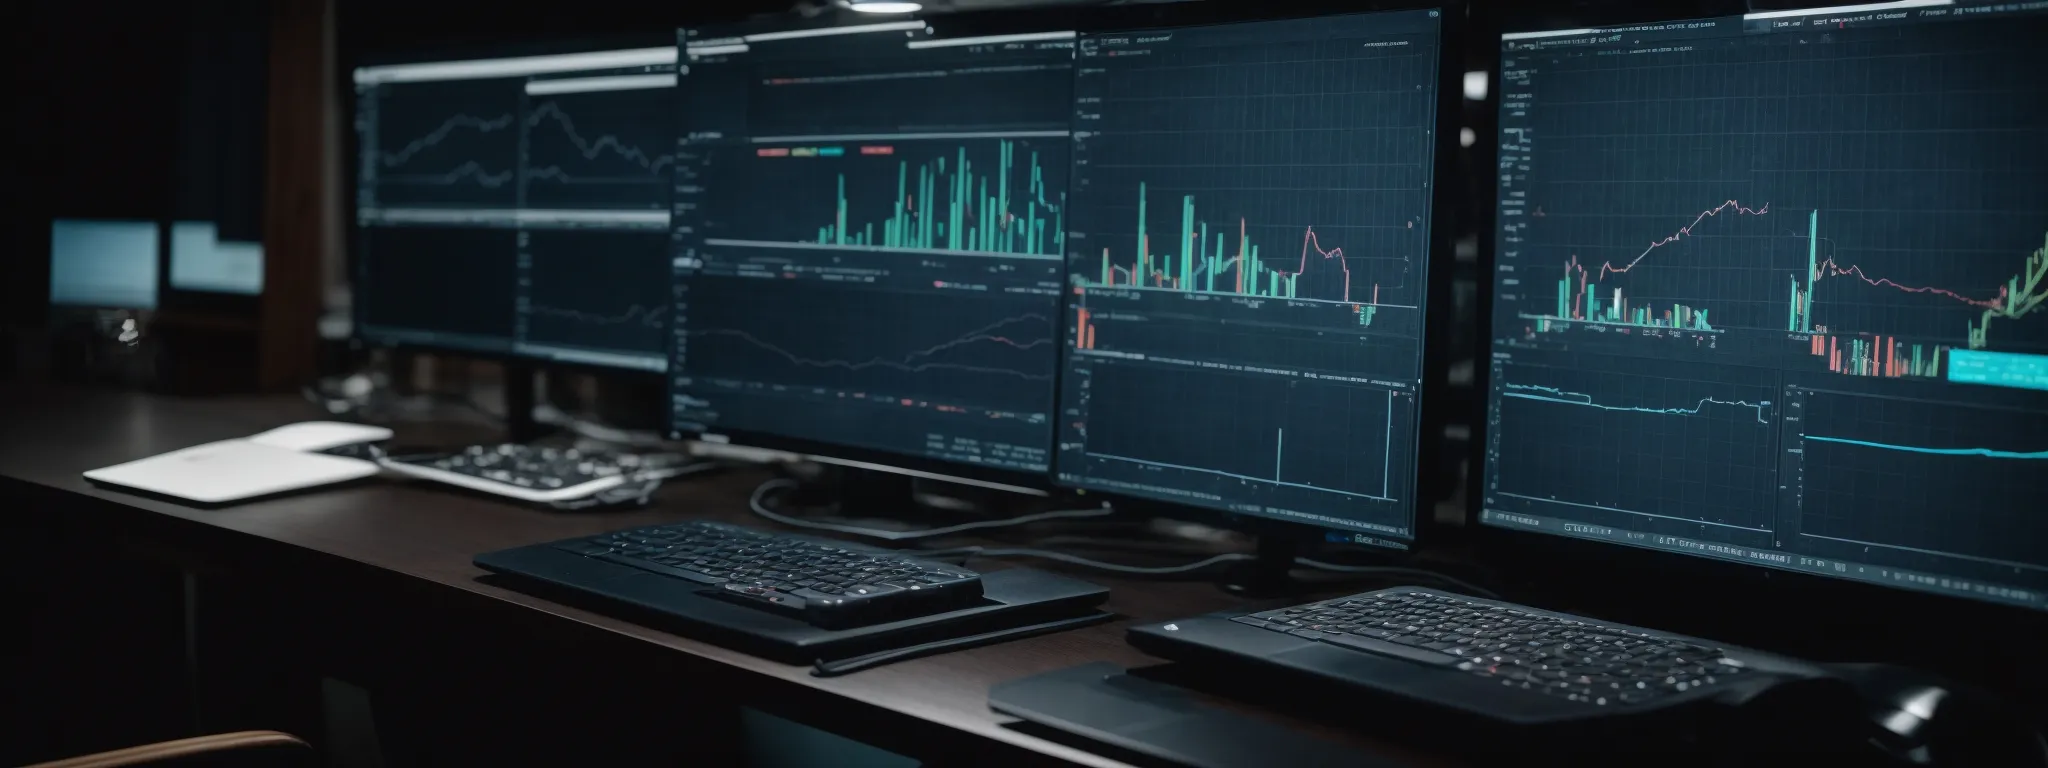 a computer screen displaying intricate data analytics graphs amidst seo tools with a modern, high-tech vibe.